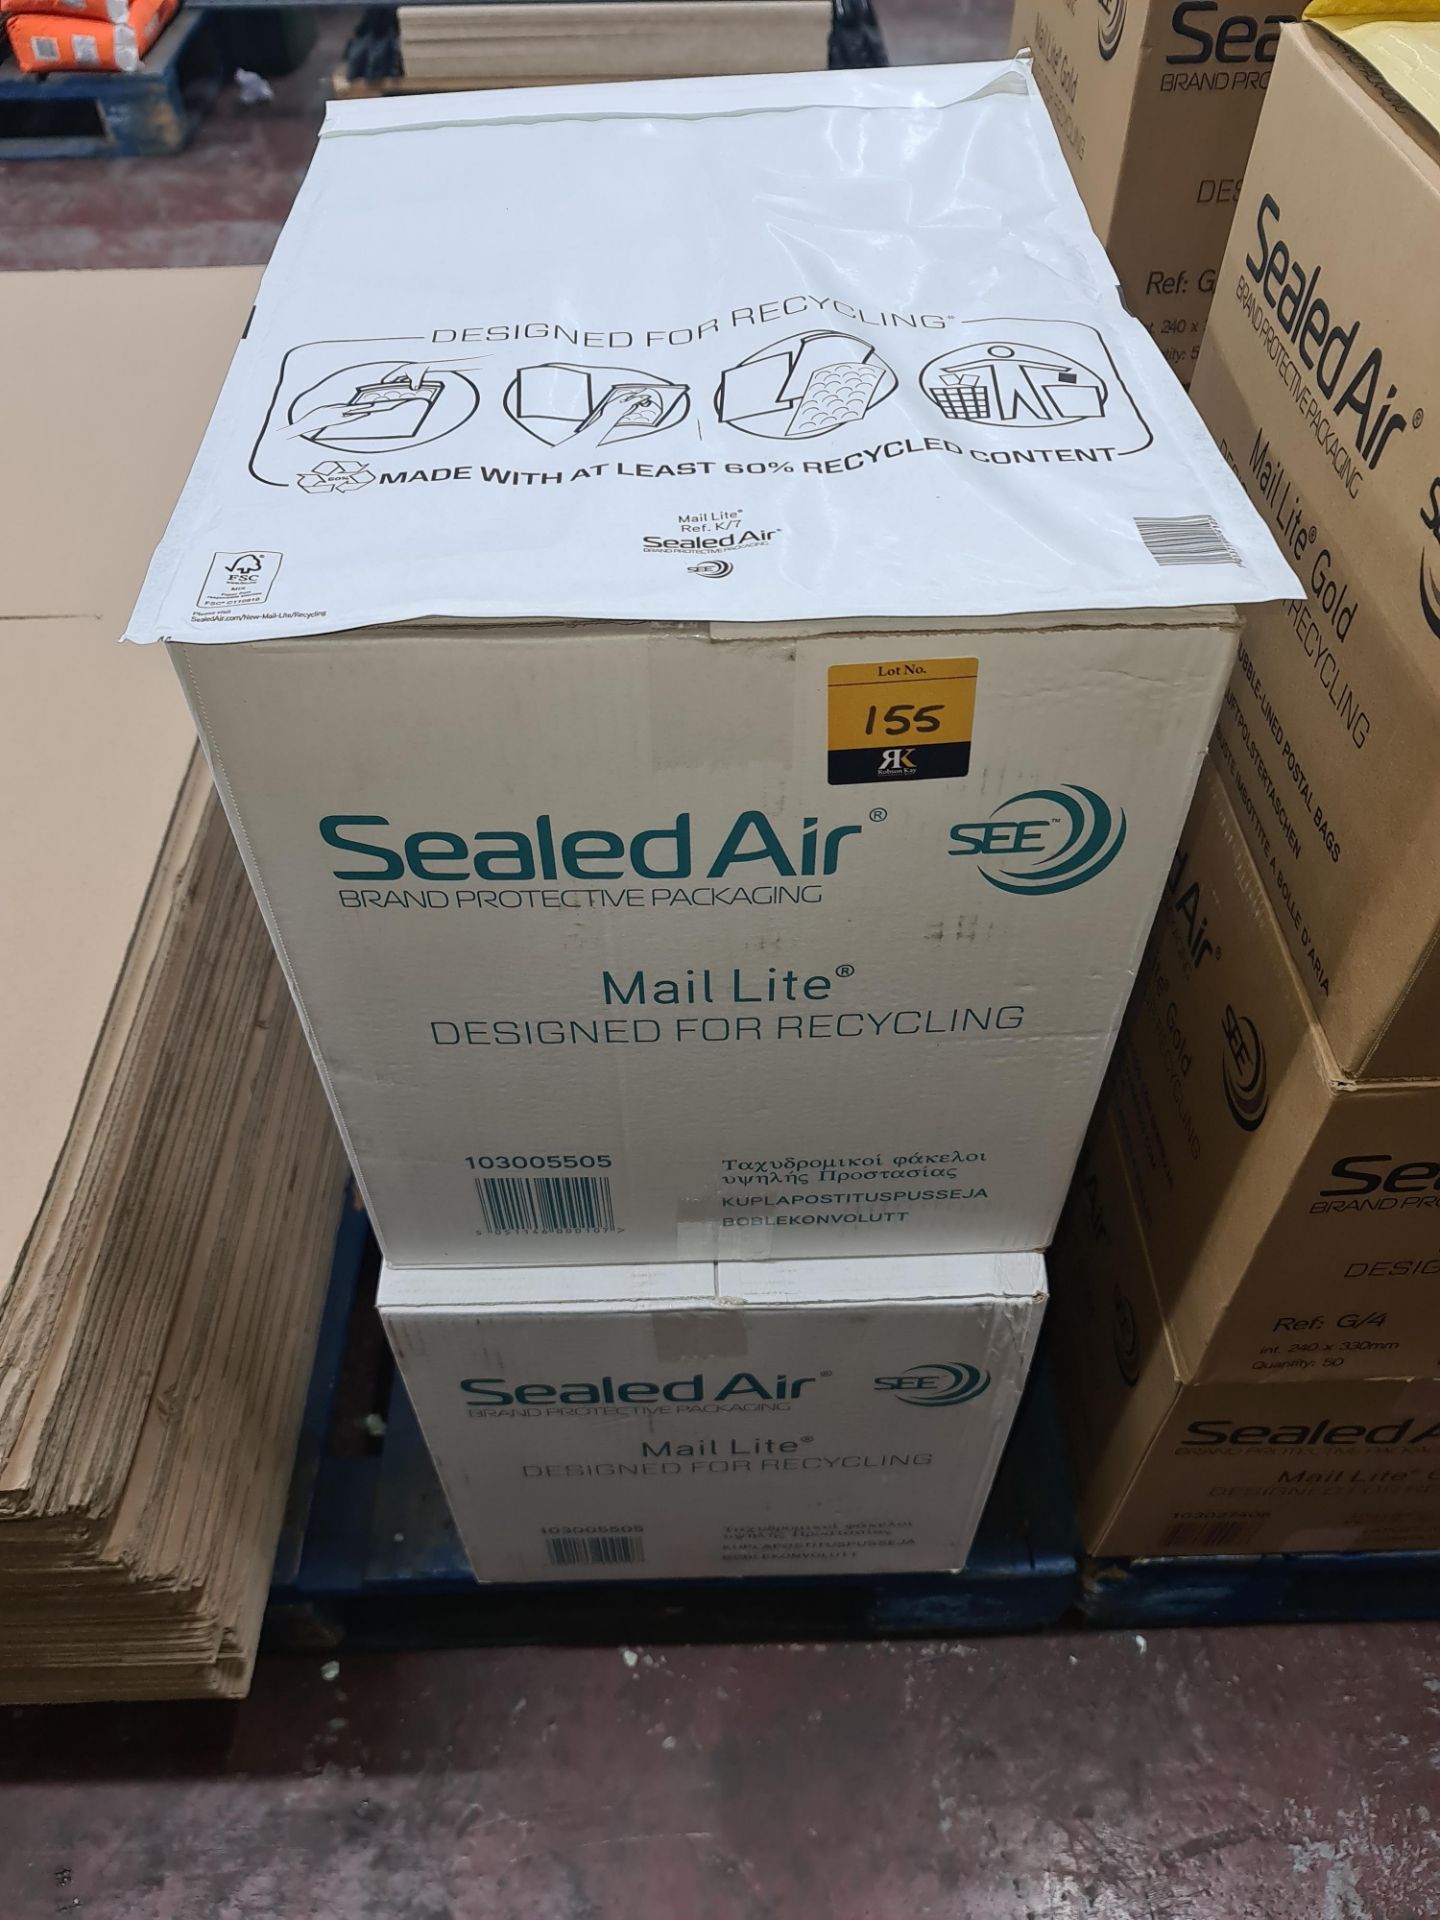 2 boxes of Sealed Air Mail Lite padded envelopes size K/7 - each box contains 50 envelopes meaning t - Image 2 of 2